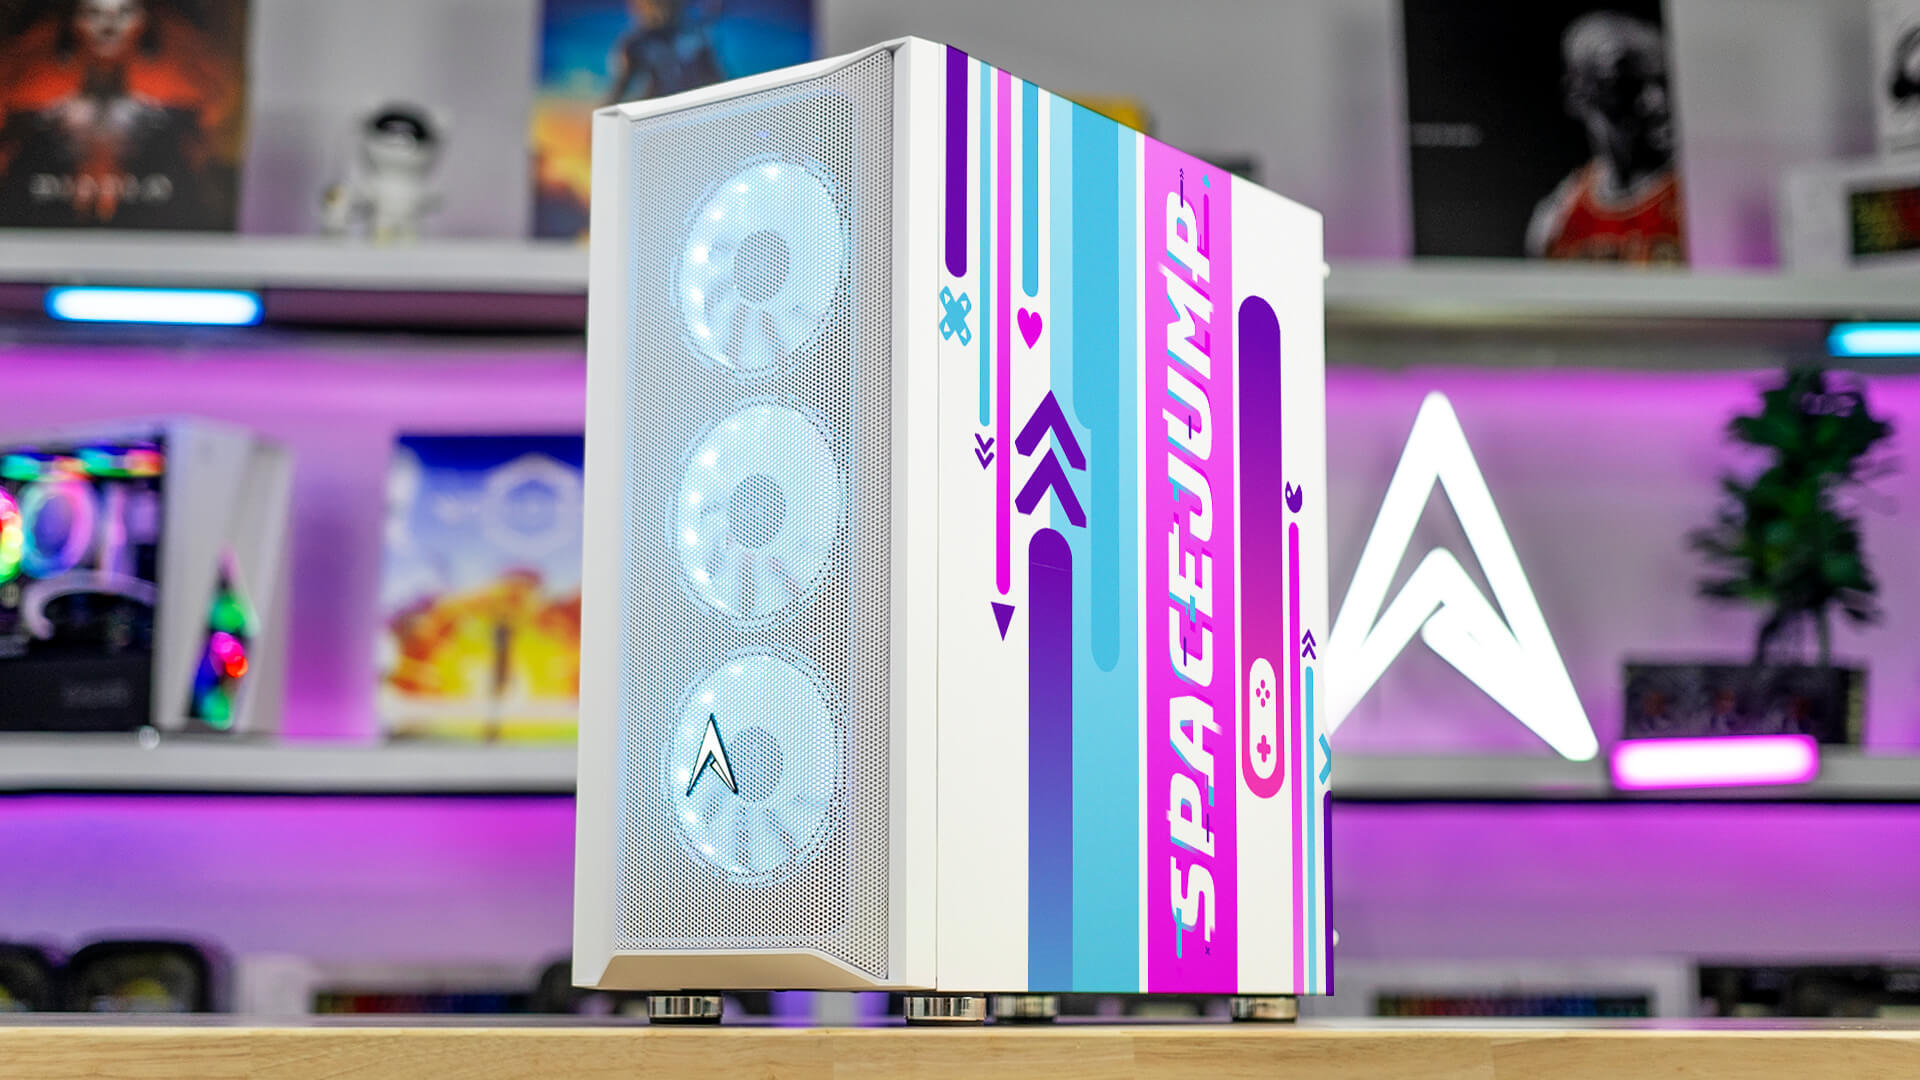 Win This Custom SPACEJUMP x Allied Patriot Gaming PC Package Worth $2999!